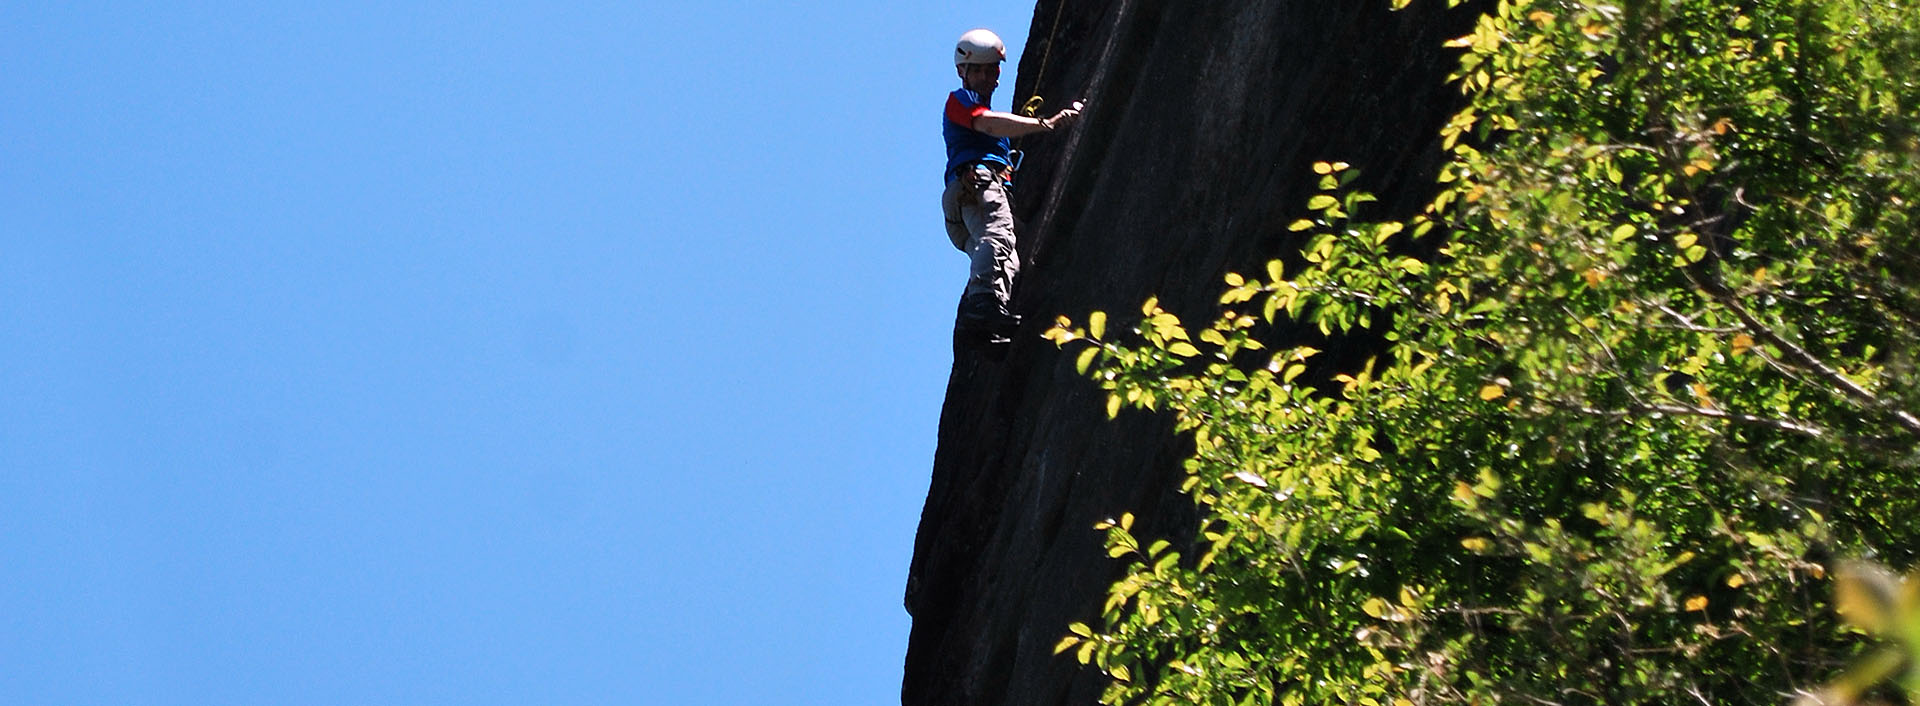 Trainee searching for bolts on high rock in the middle of a lead trad climbing pitch.